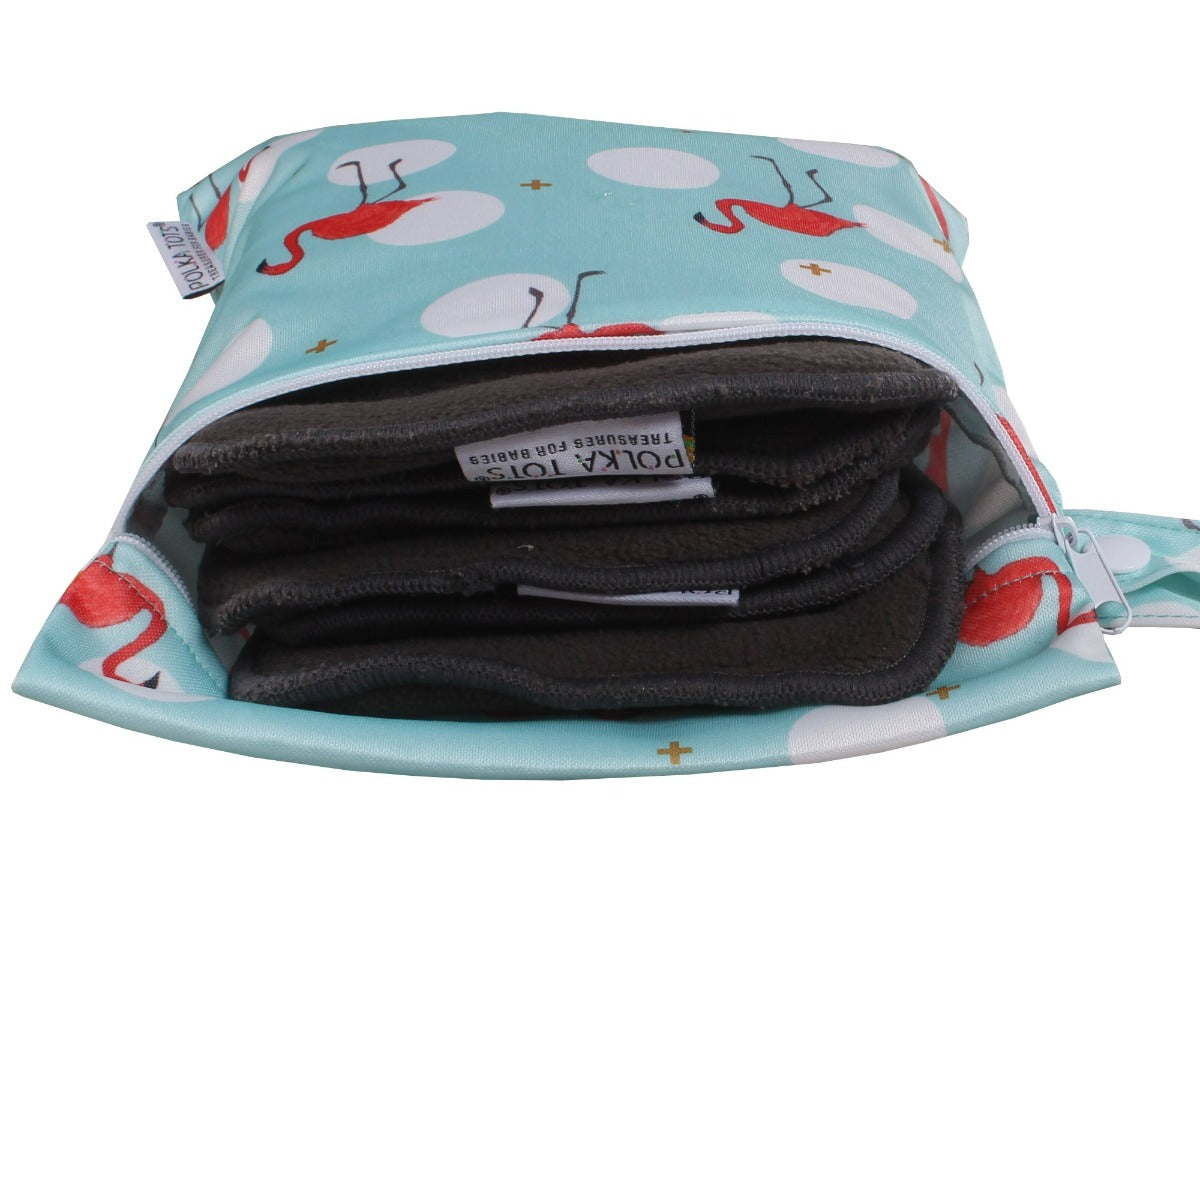 Bamboo Charcoal Diaper inserts in wet bag 